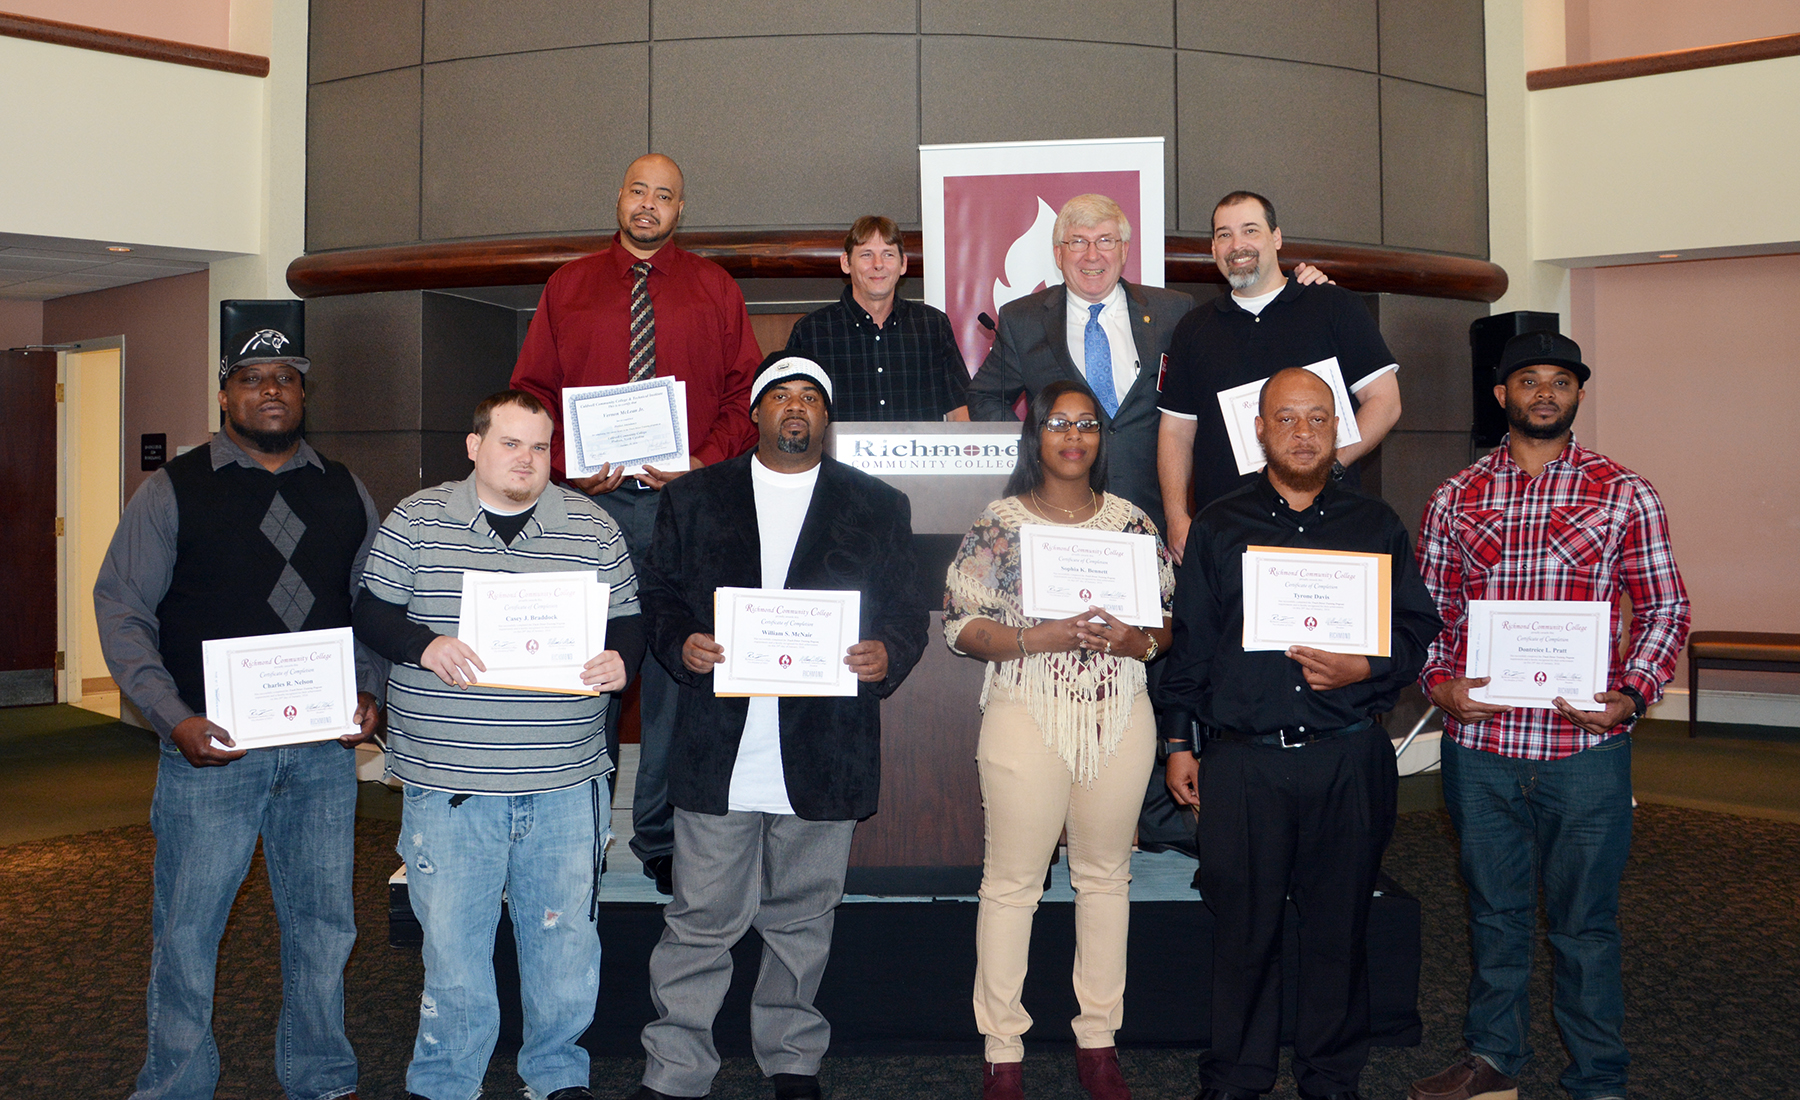 Sen. Tom McInnis stands with Richmond Community College’s truck driver training graduates who were recognized at a ceremony on Jan. 29 at the Cole Auditorium. McInnis was instrumental in securing funding for this program to make it affordable for people looking to begin a career with the trucking industry.